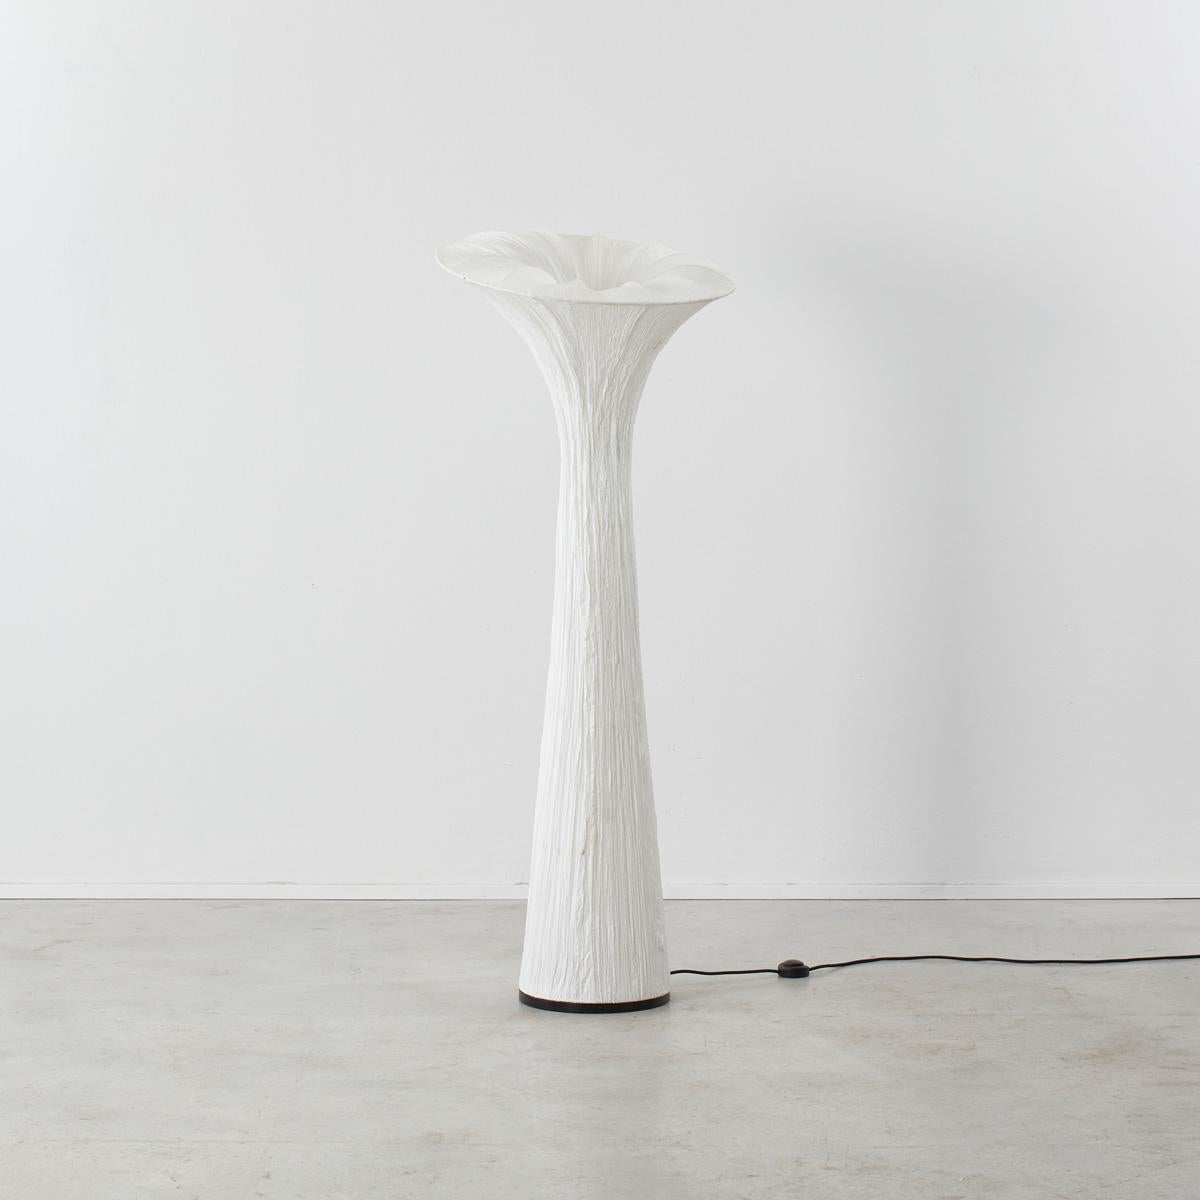 A distinctive lamp in an elegant, organic shape. The crinkly texture of the paper-fabric shade, which emulates the membrane of a petal, casts a lovely warm light. We see reminders of Issey Miyake’s Pleats clothing and Ingo Maurer’s crepe paper